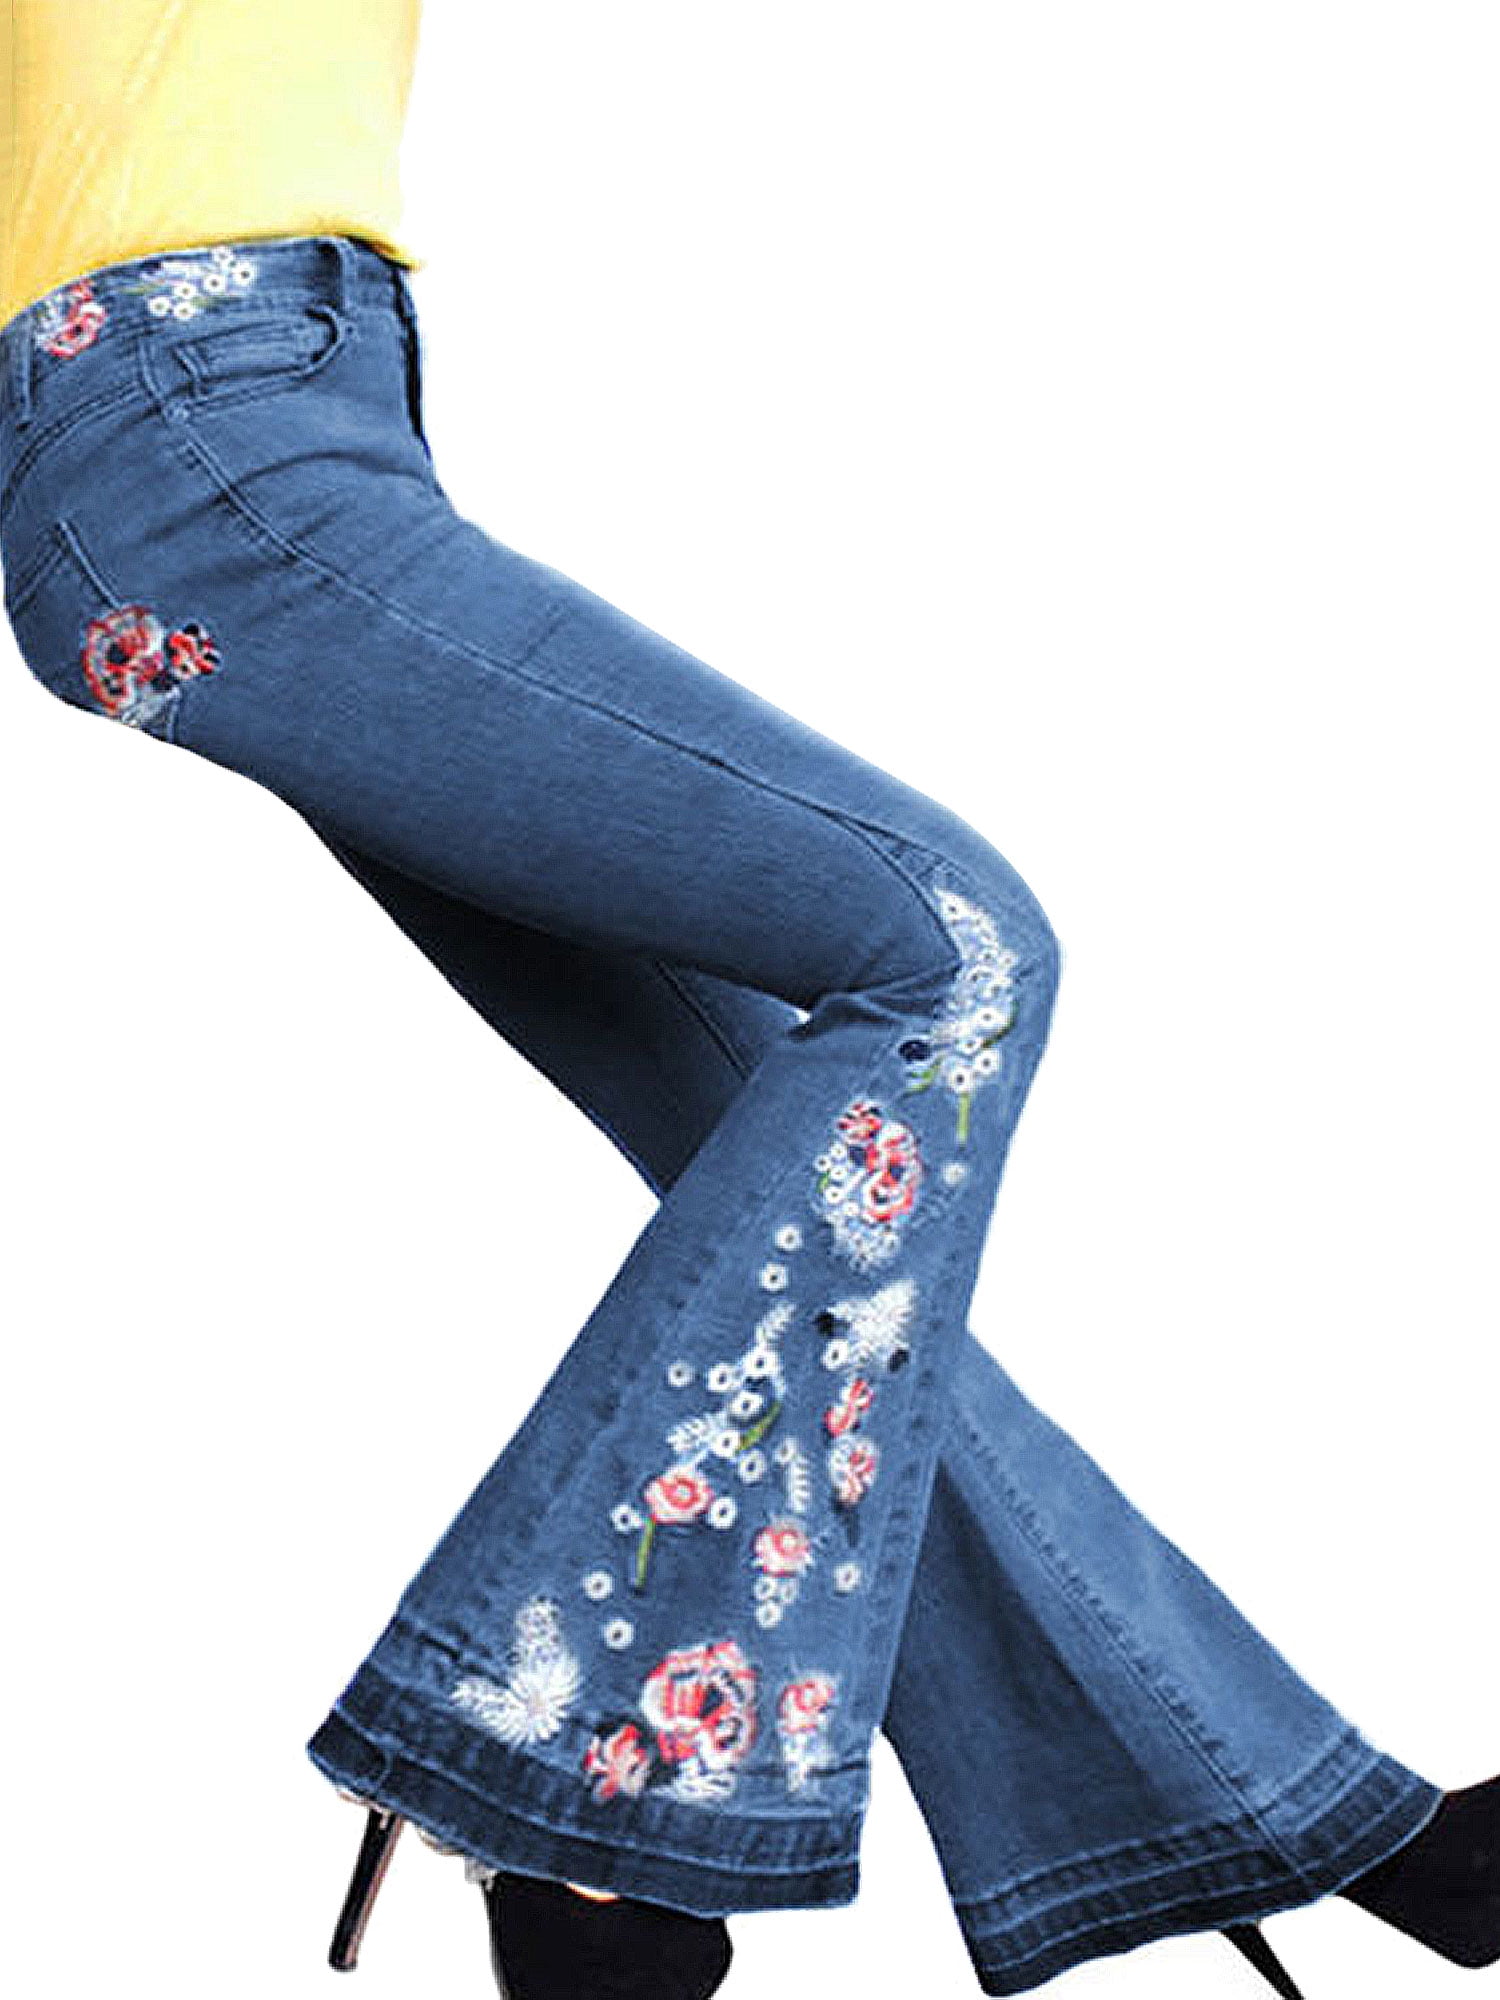 Women's jeans embroidered flowers retro vintage size 6 stretch